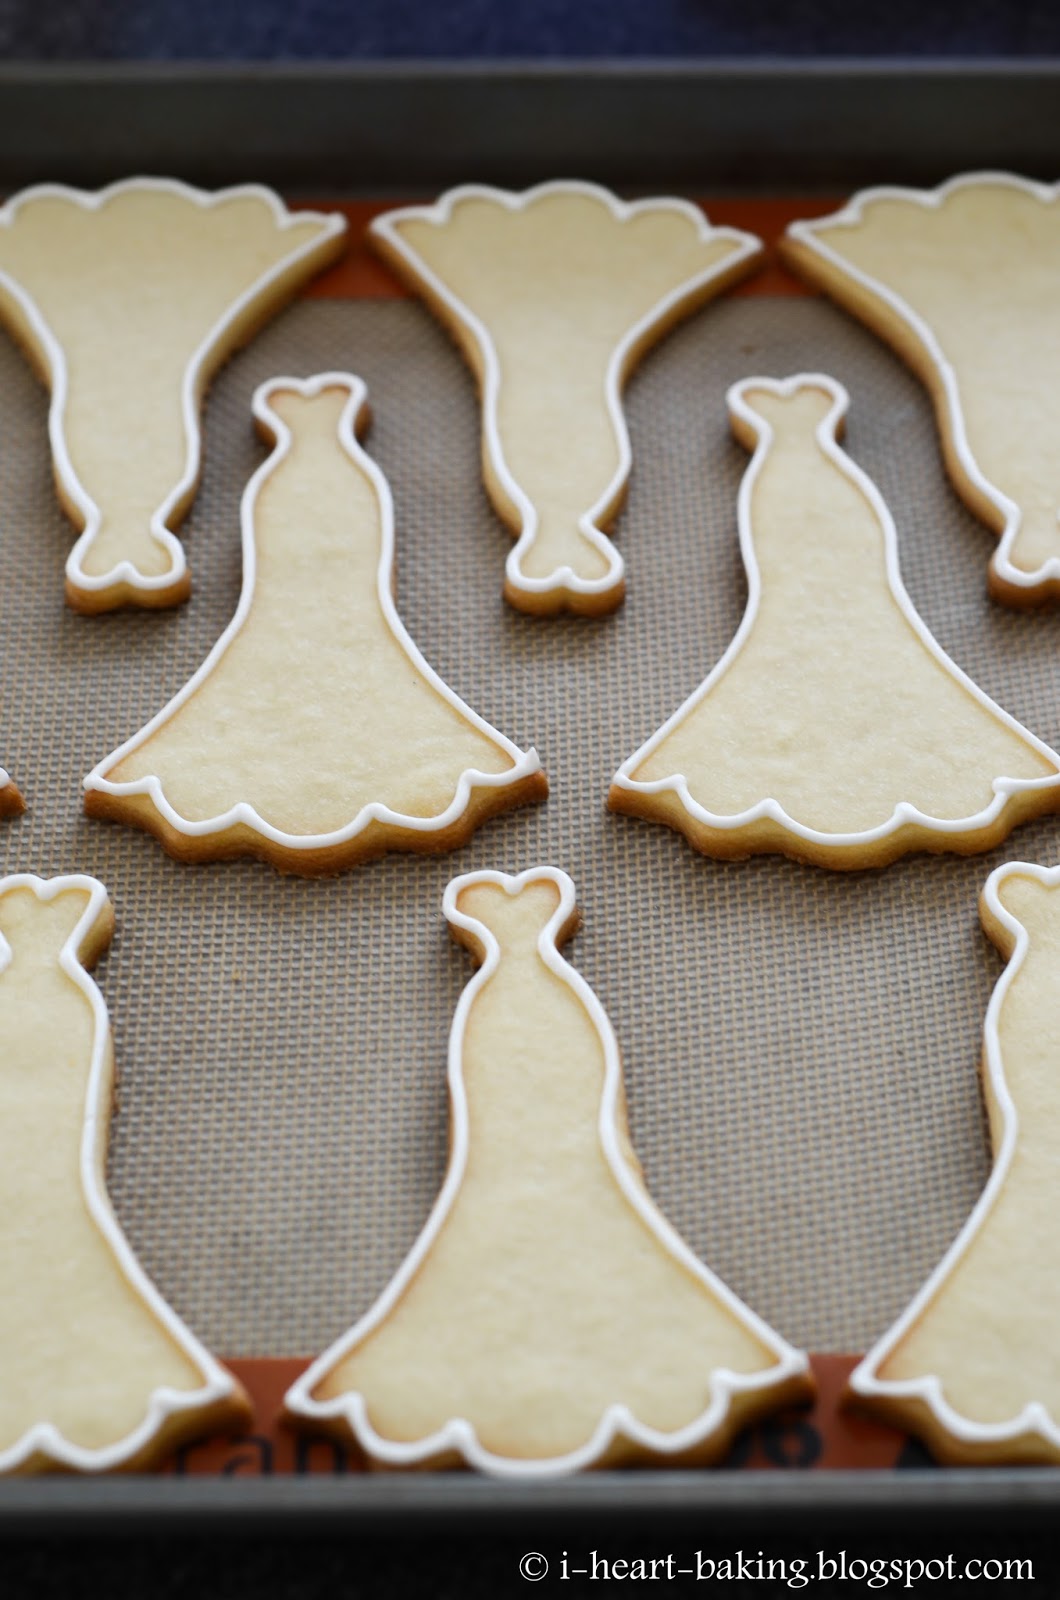 Pin on Cookies: Here Comes the Bride